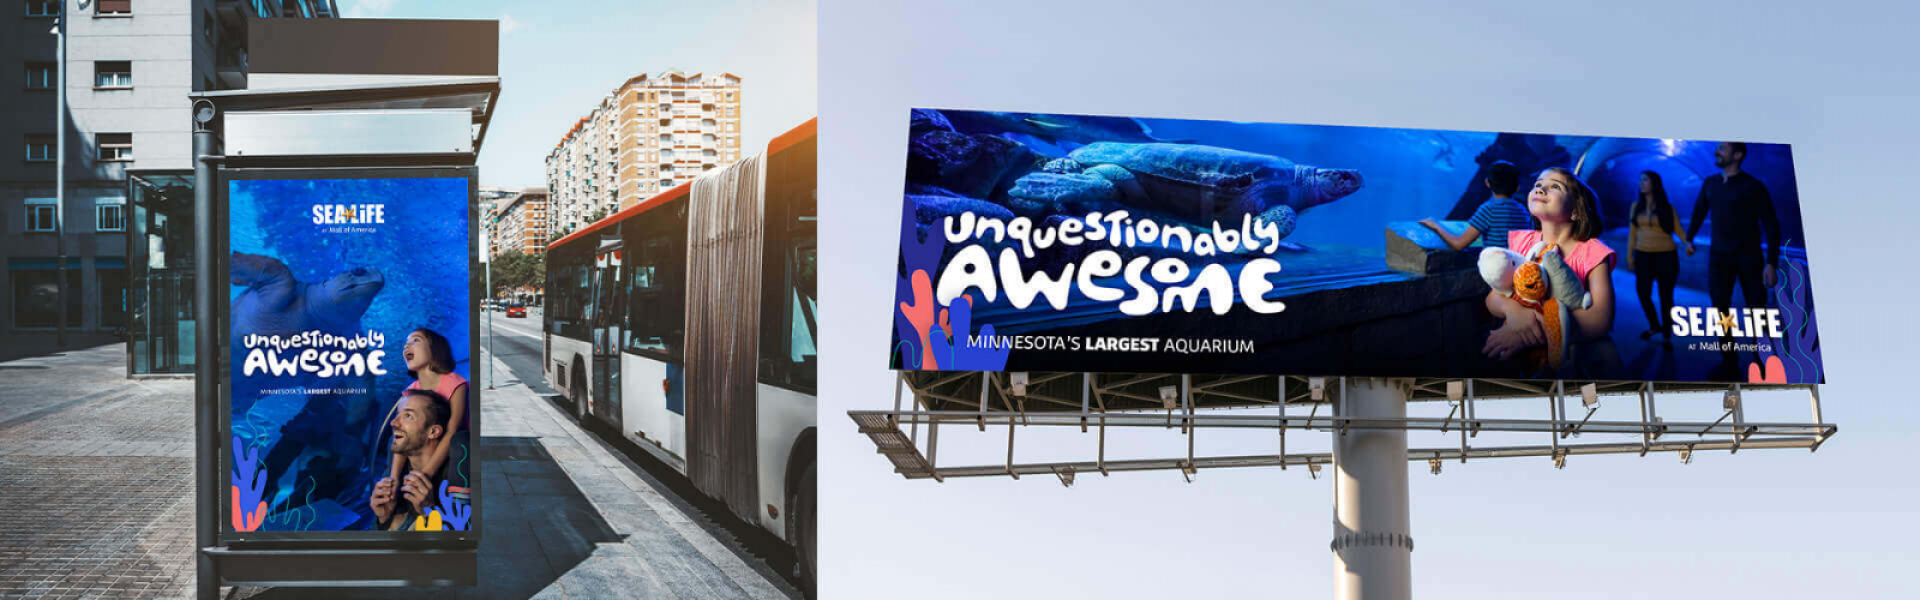 billboards and bus coverings graphics